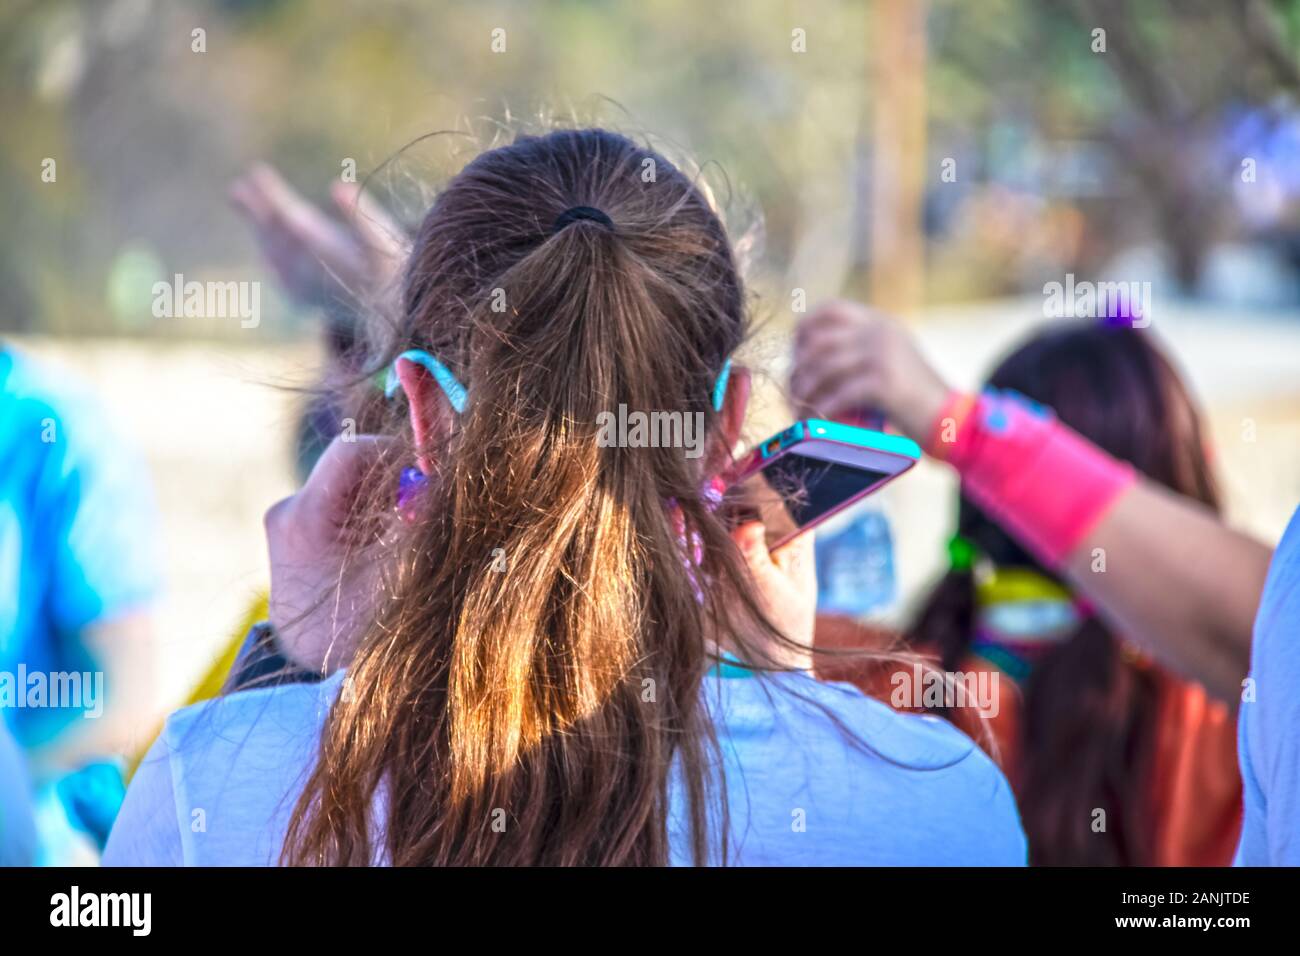 Holi Color Festival - Girl with pony tail and turquoise sunglasses and bright colored phone in hand runs through a color station - unrecognizable with Stock Photo